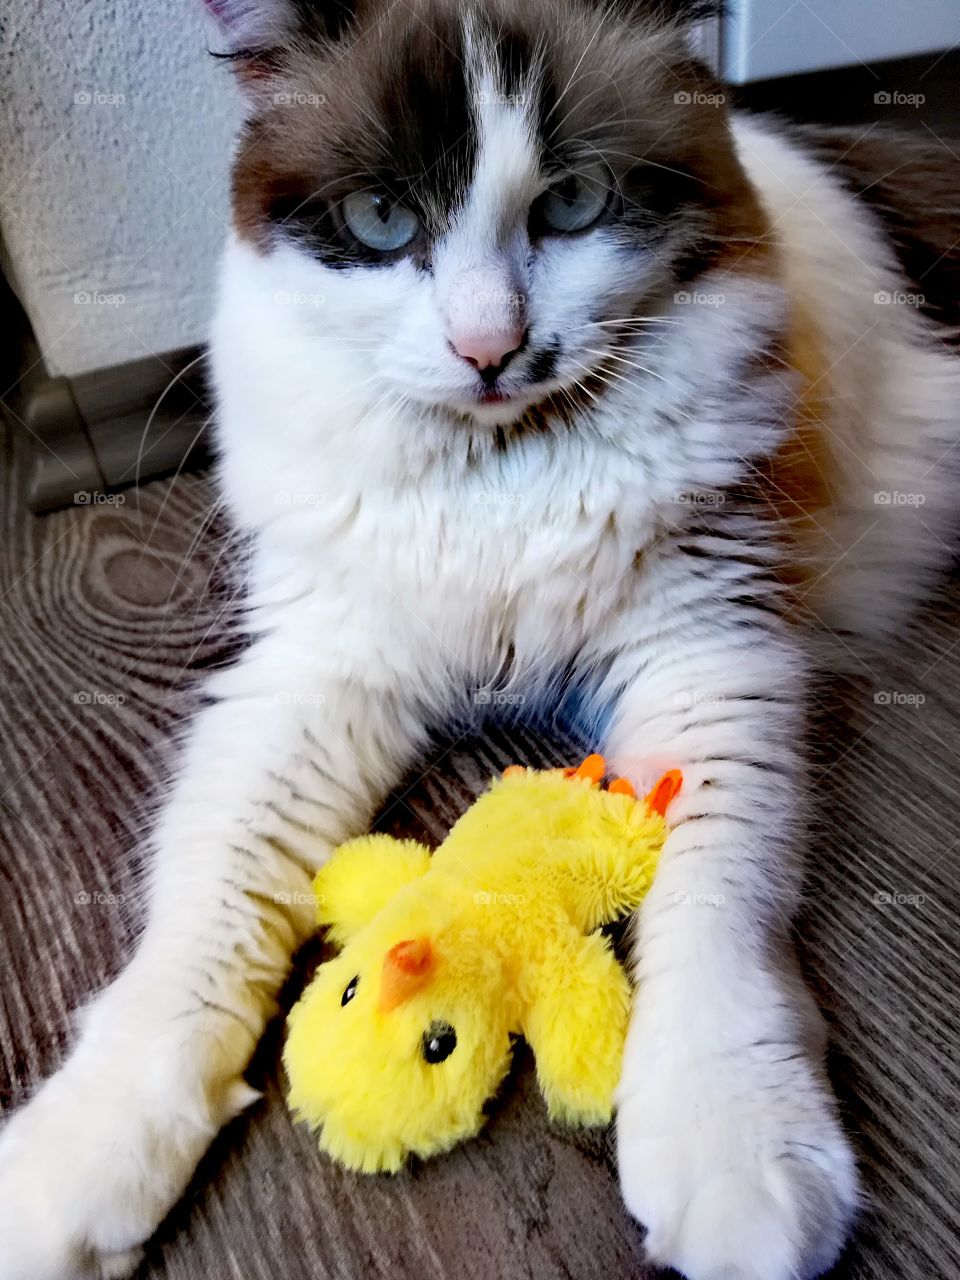 Jelly and her chick